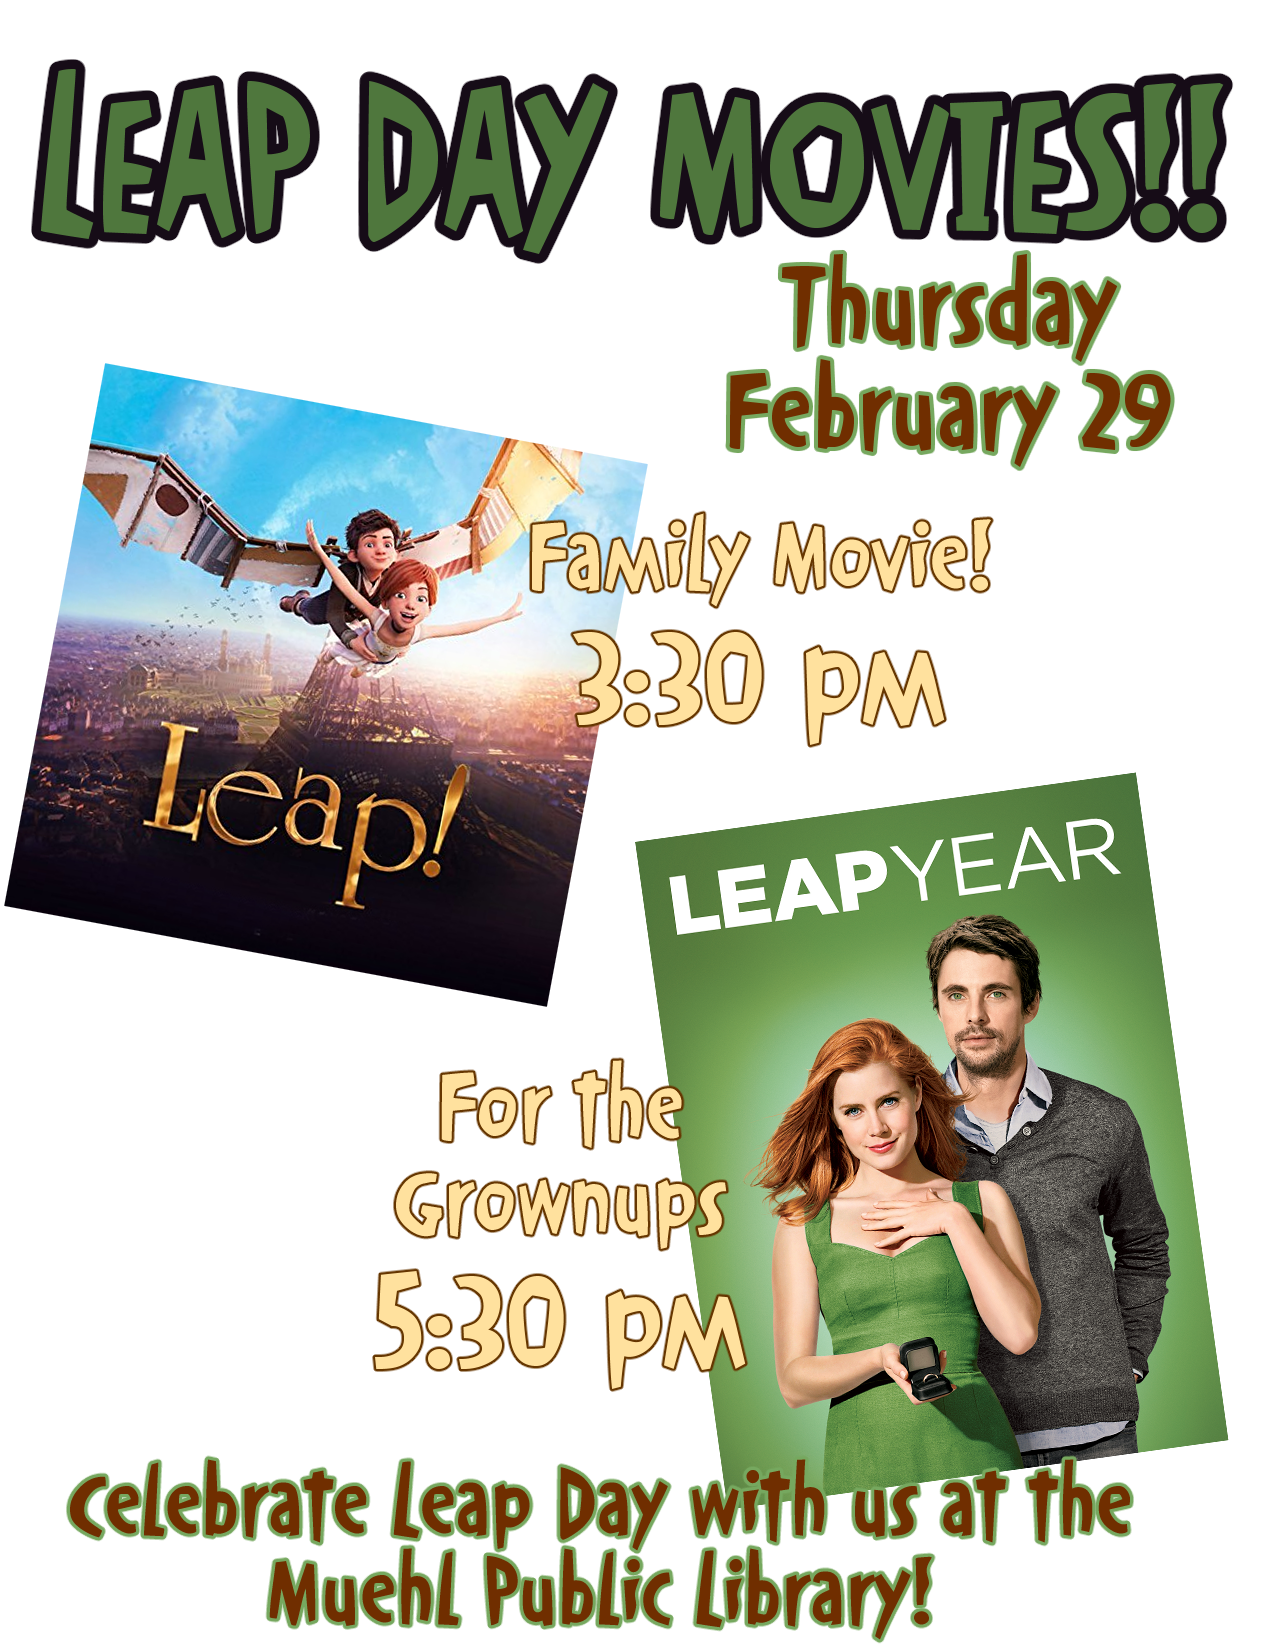 Two movies: LEAP! @ 3:30 and LEAP YEAR @ 5:30